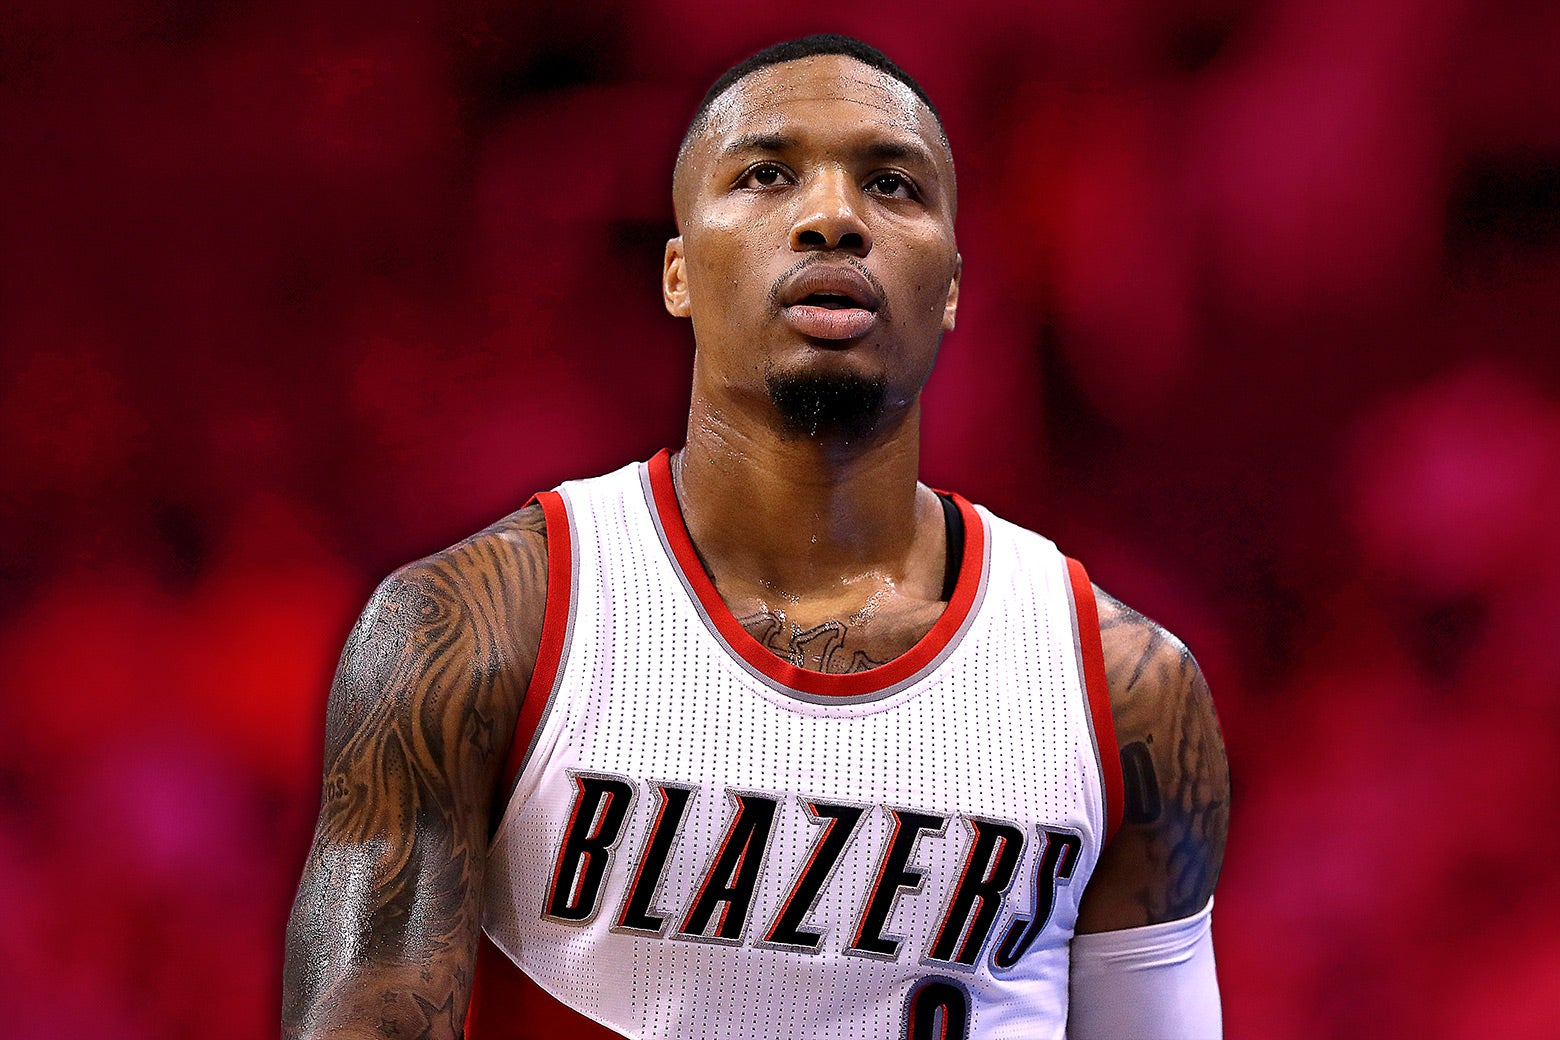 Damian Lillard is the NBA's coolest star. Here's why.